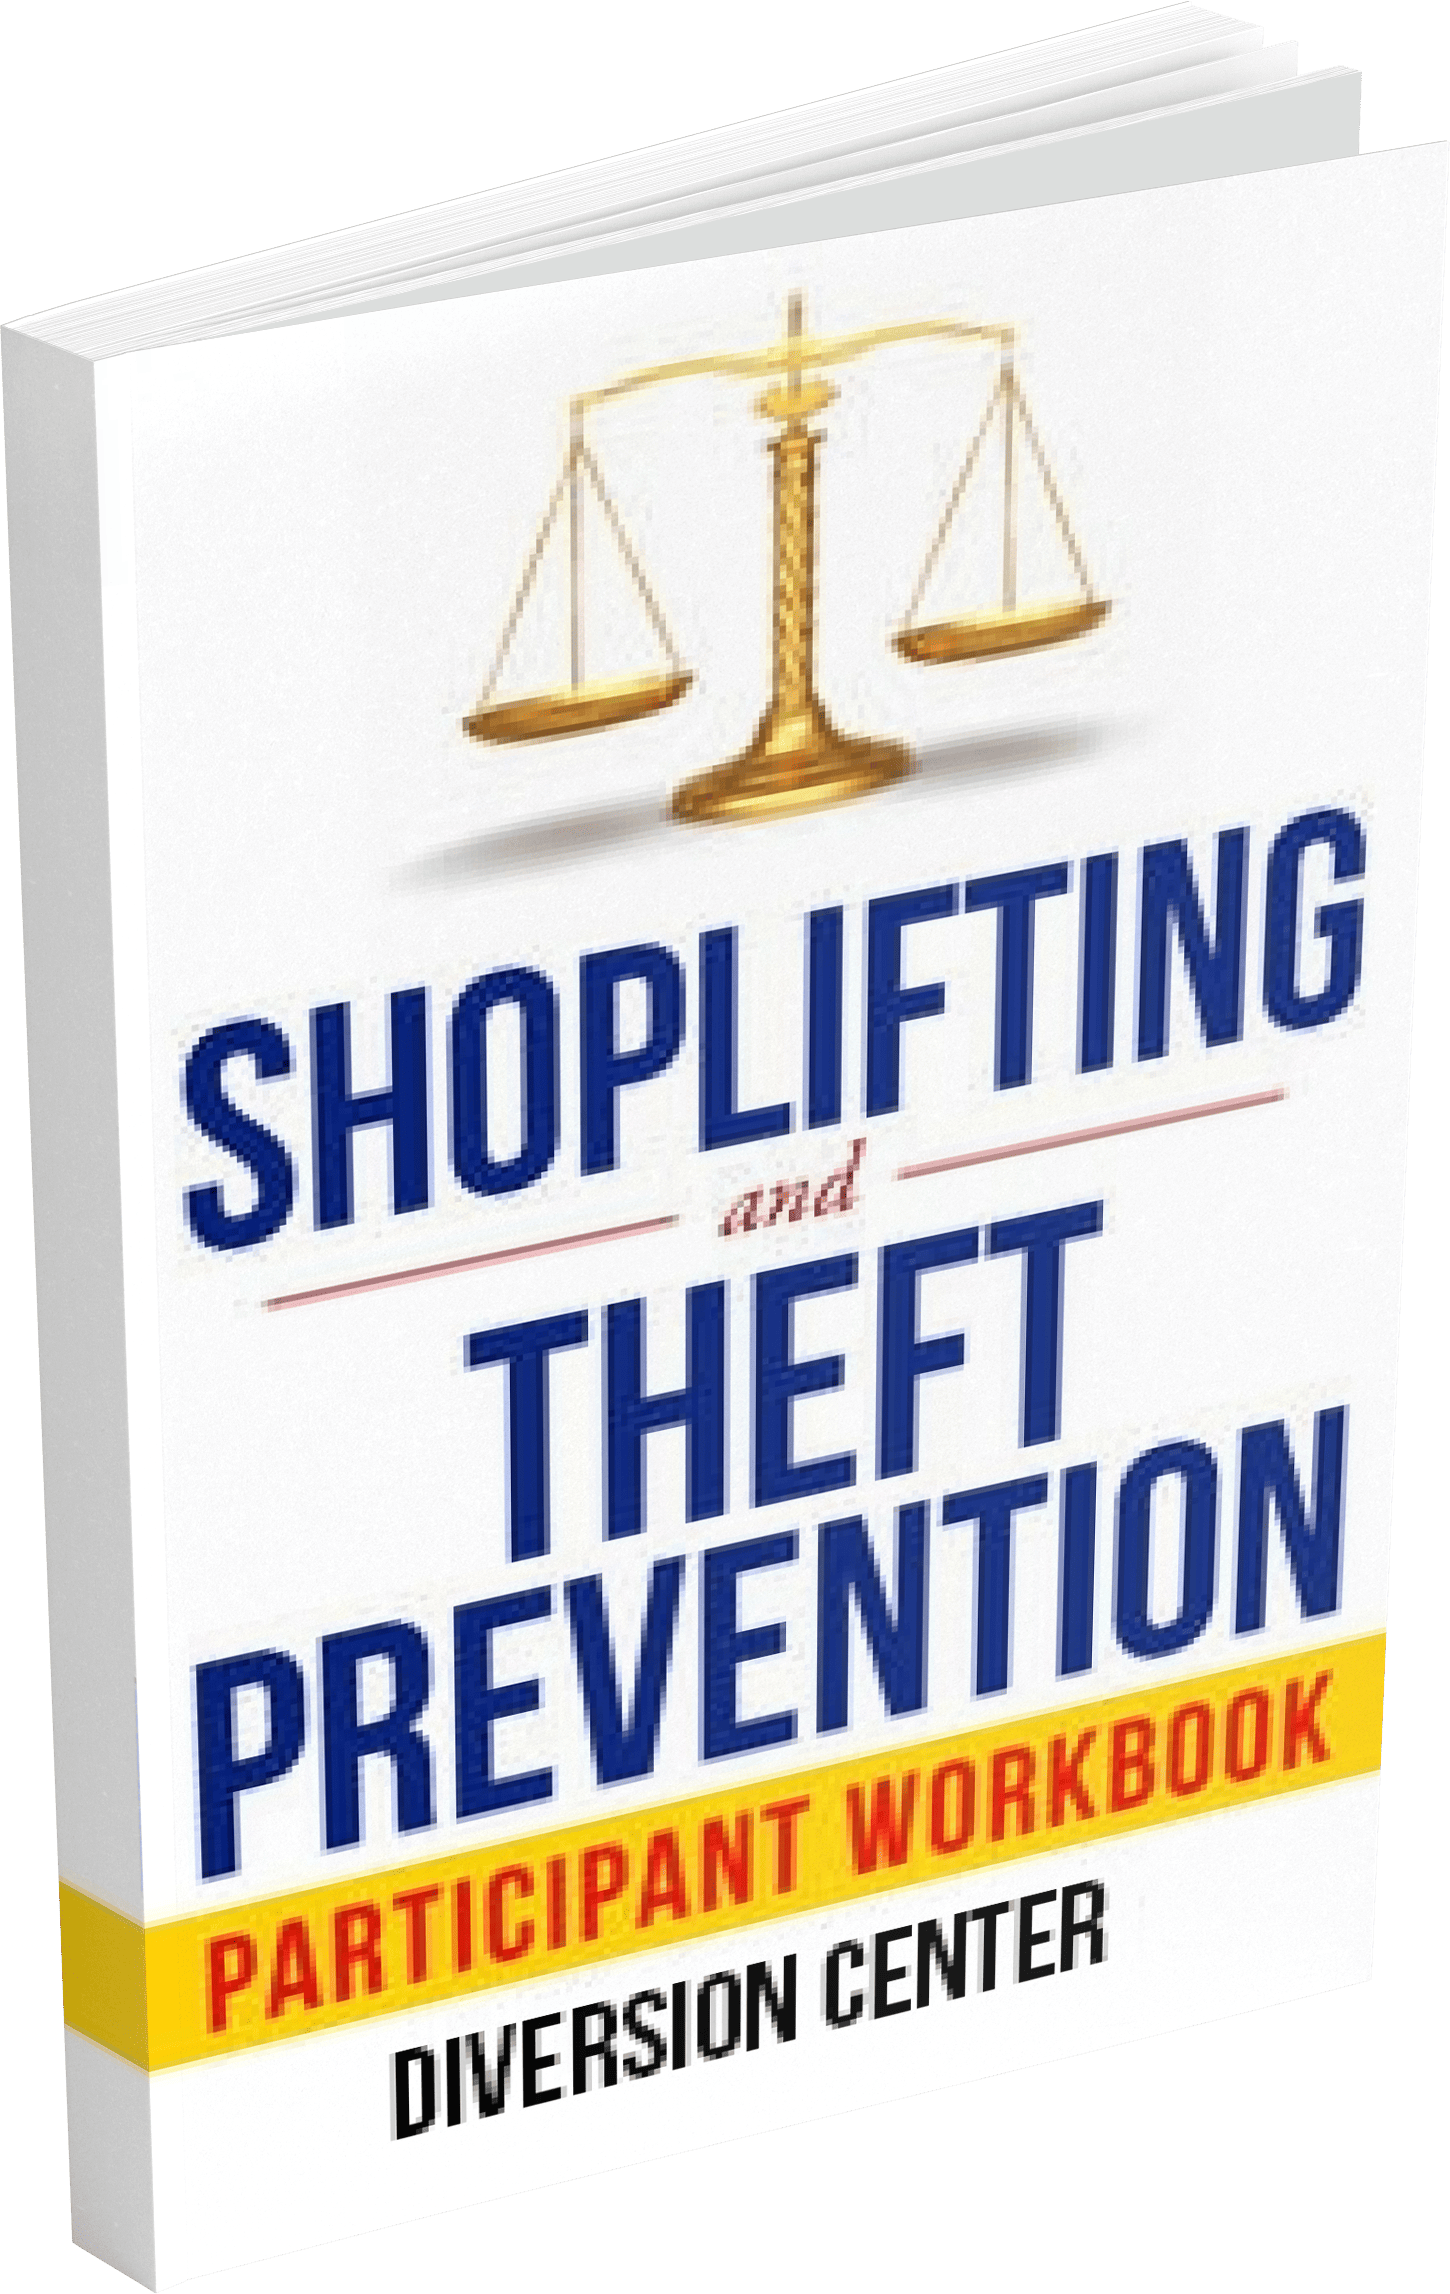 Shoplifting and Theft Prevention Participant Workbook